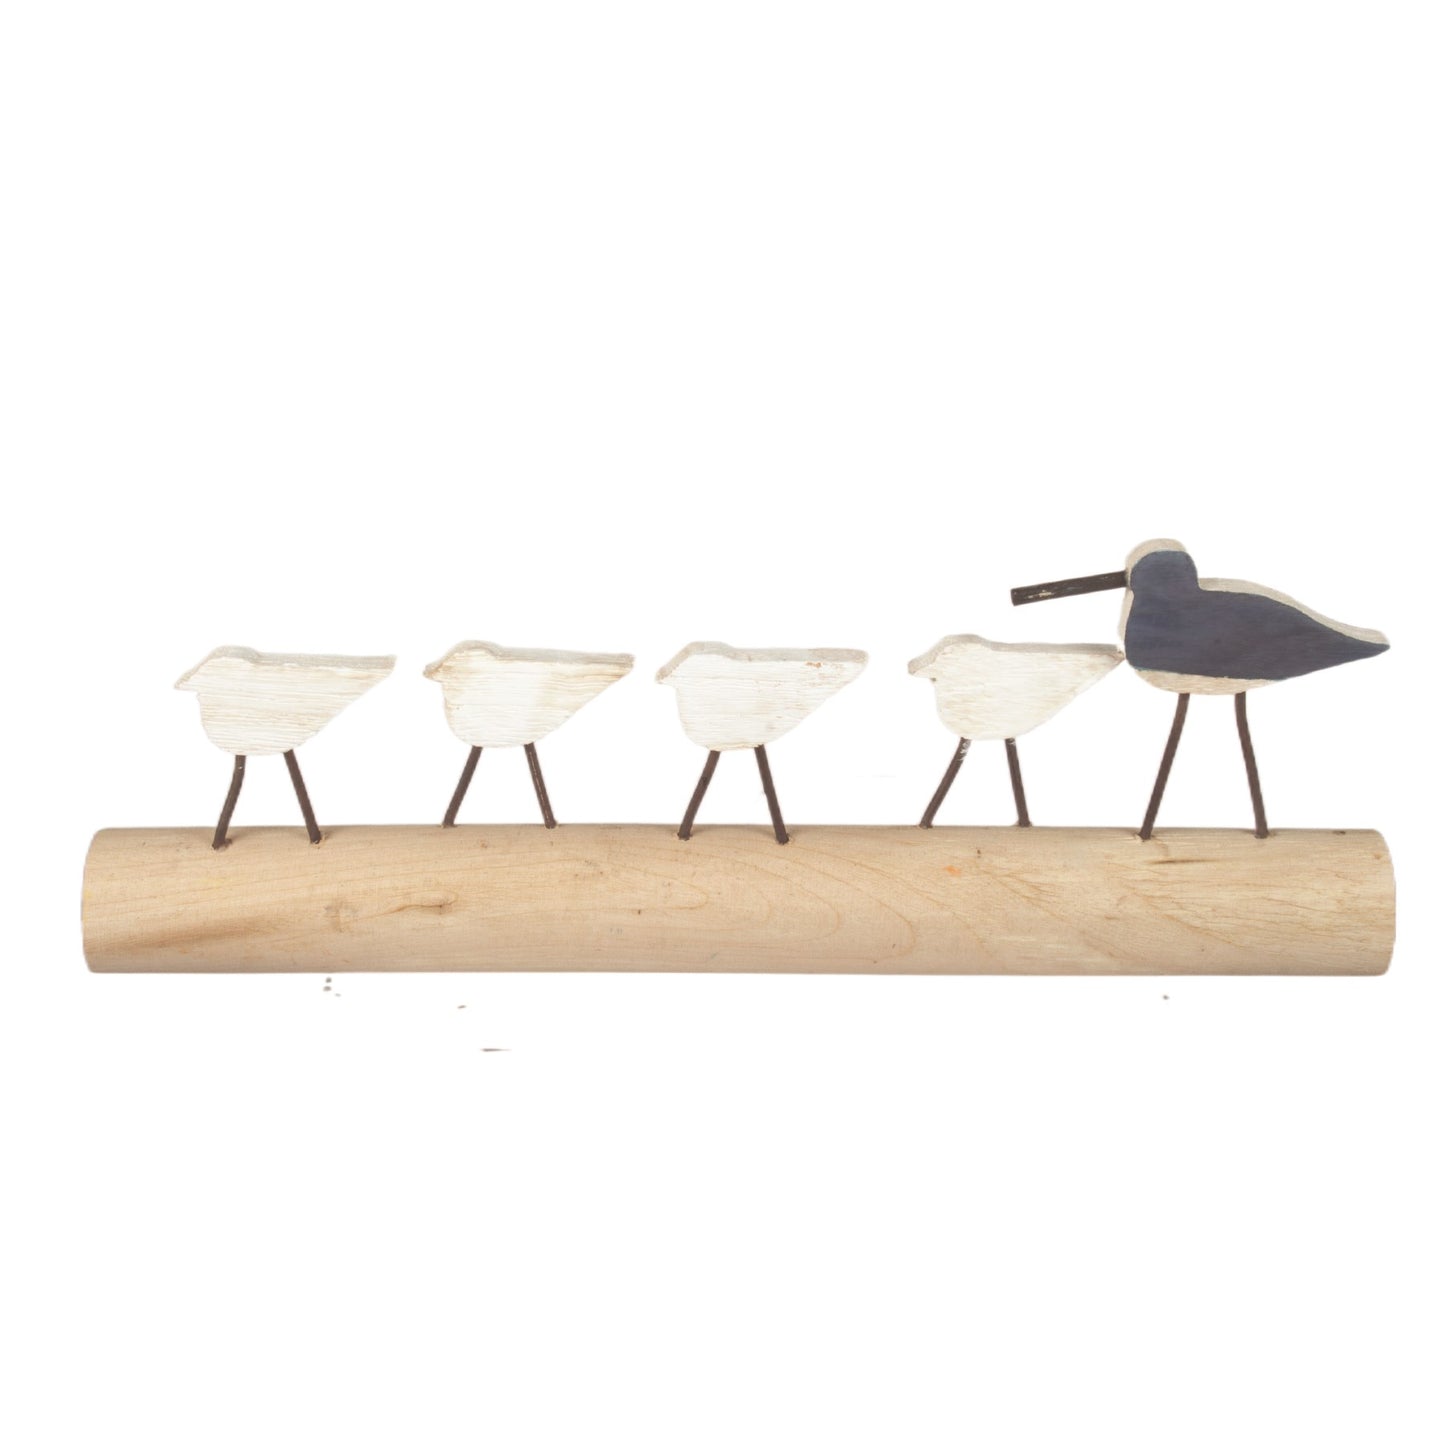 Sandpiper Family on Wood